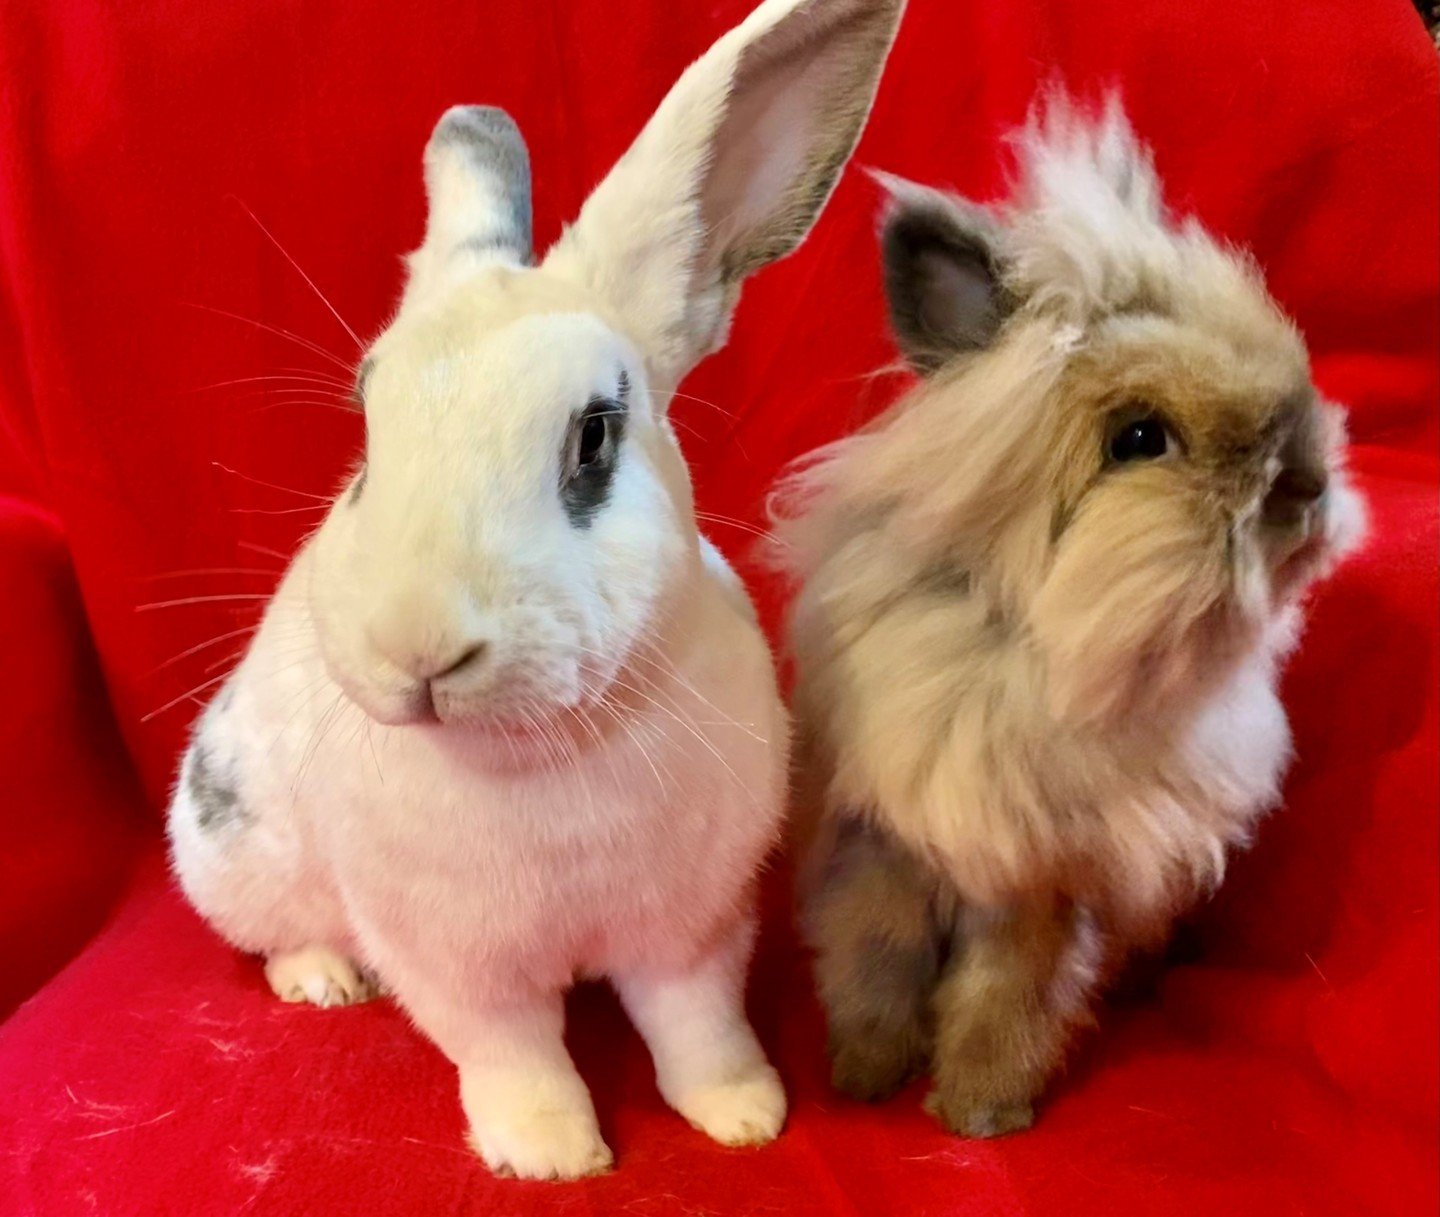 Meet Chevron and Levi! Lovely cheeky Chevron is a very sweet and social bunny girl. Although she&rsquo;s larger than her lil nugget companion Levi, their size difference makes no matter. She loves getting pets and has had some clicker command trainin